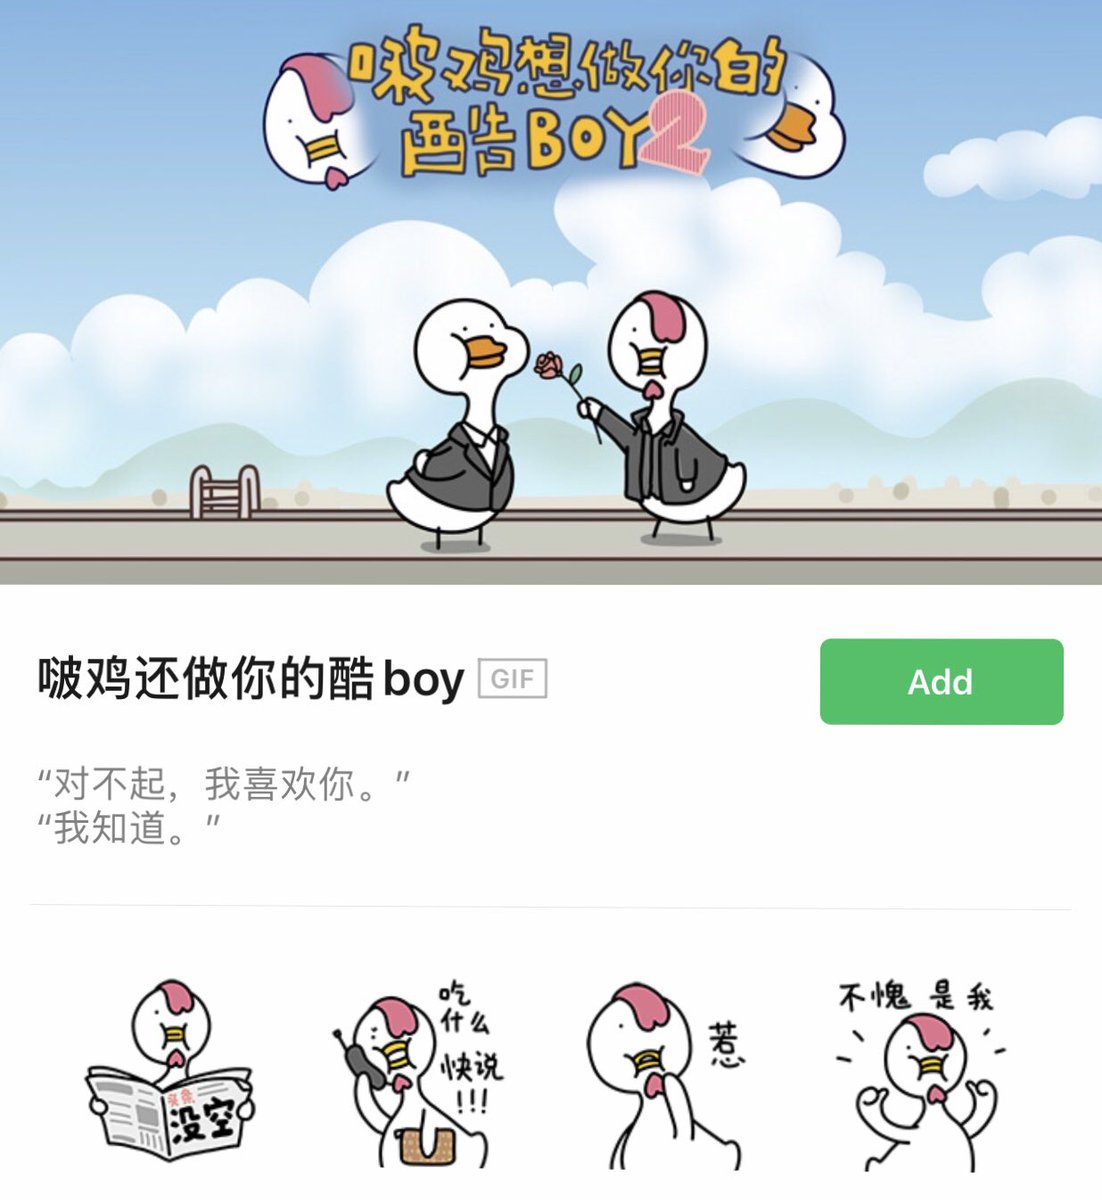 the chicken and duck saga continues thanks to  @sunsandships and the "boji wants to be your cool boy 2" sticker pack...... the header image!!! he's giving a rose to buya!!! and the DESCRIPTION!!!"sorry, I like you.""I know."